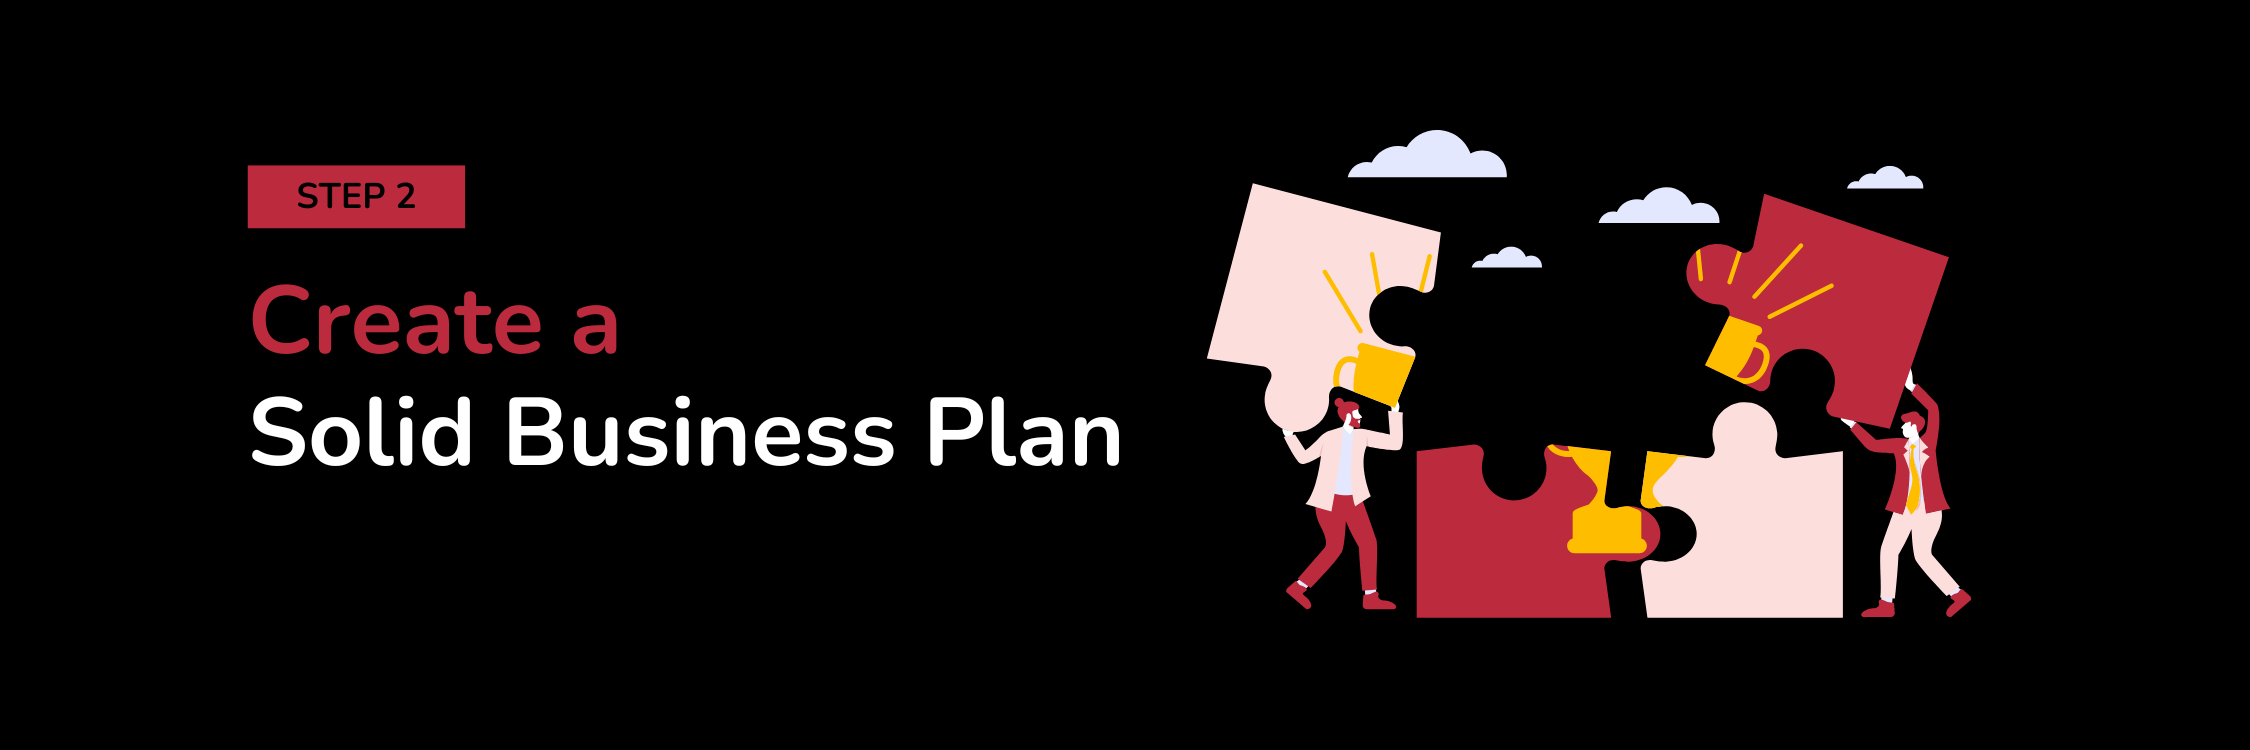 Step 2: Create a Solid Business Plan